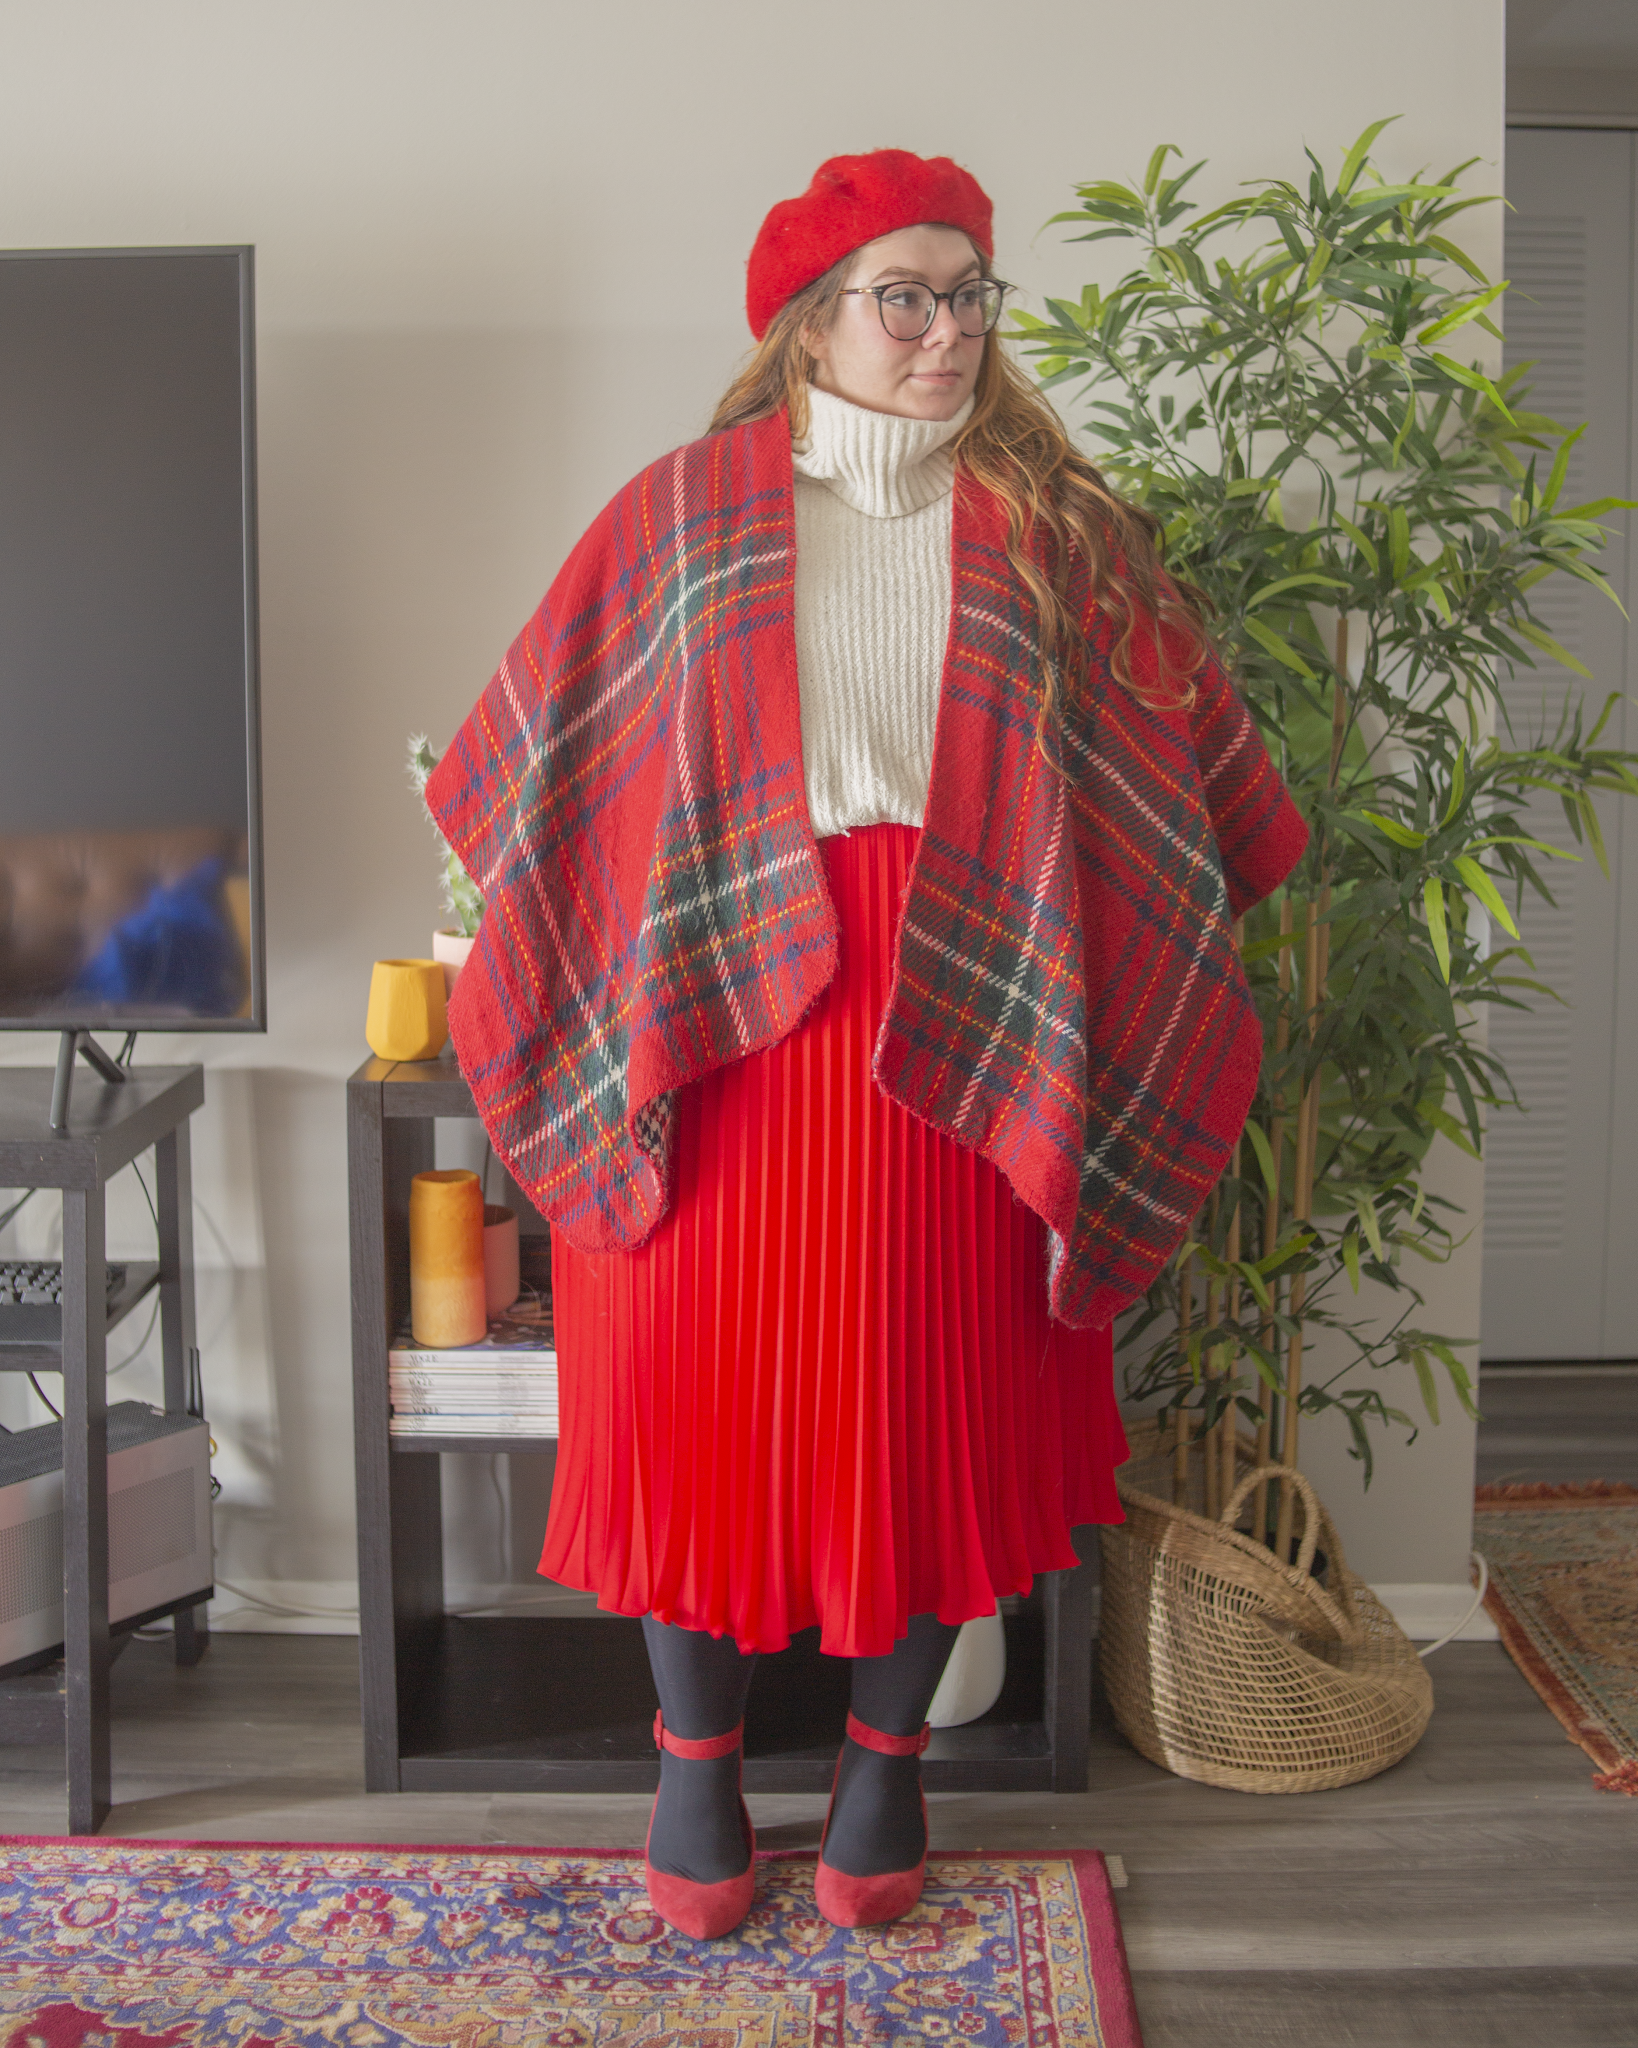 An outfit consisting of a red, white, green and blue plaid poncho over a white chenille turtleneck sweater, half tucked into a red pleated midi skirt and red ankle strap heels.